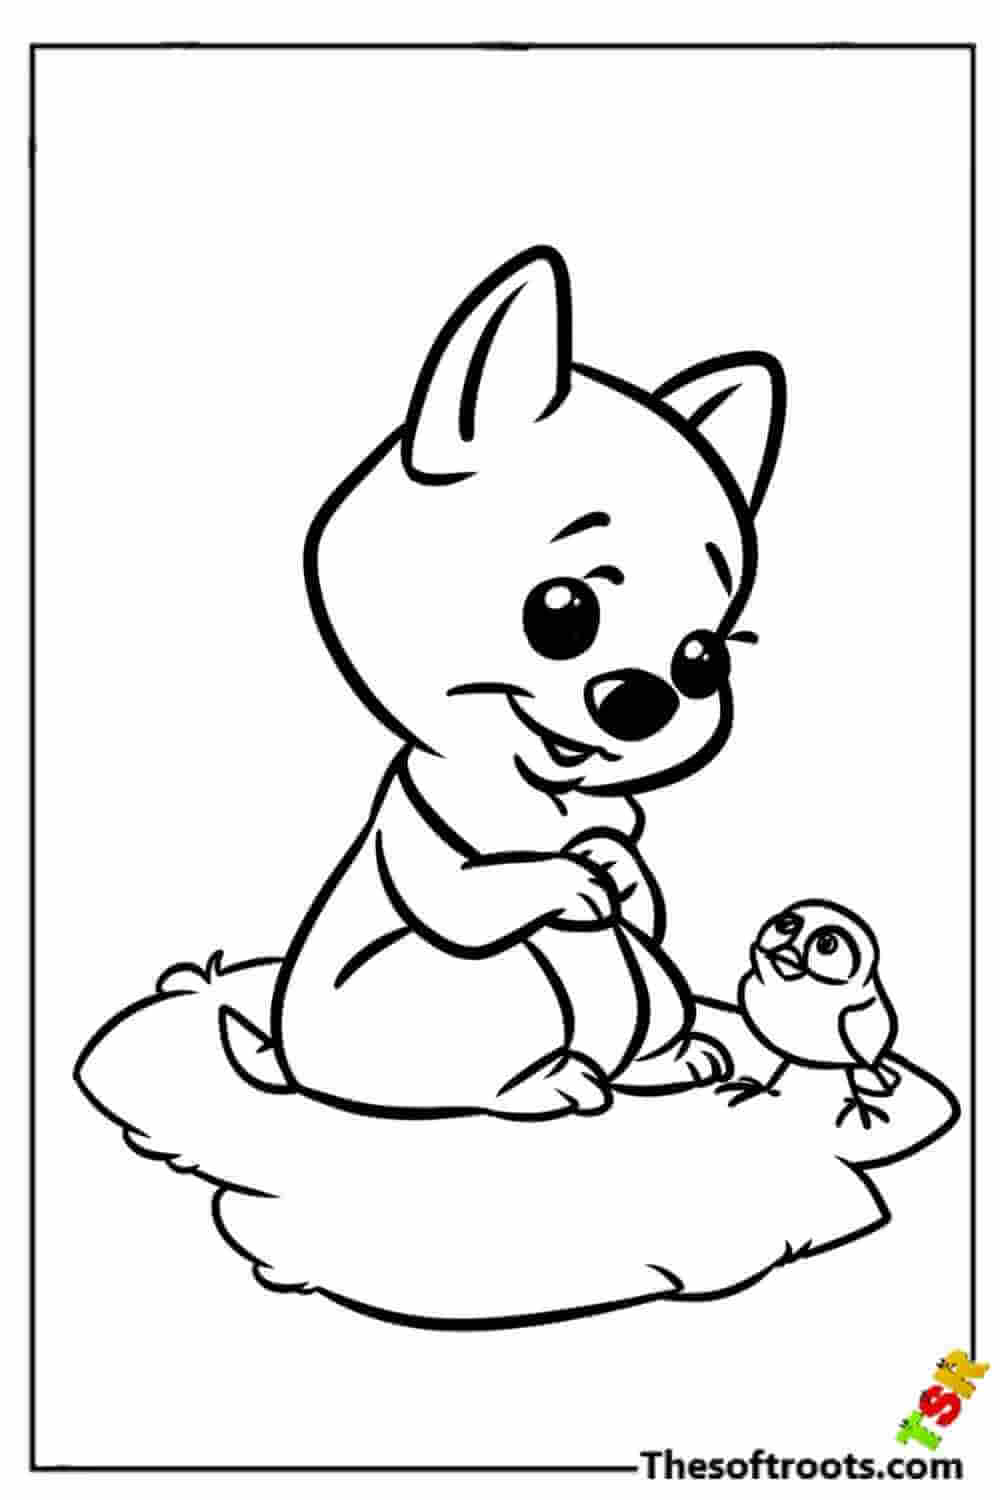 Puppy and bird coloring pages